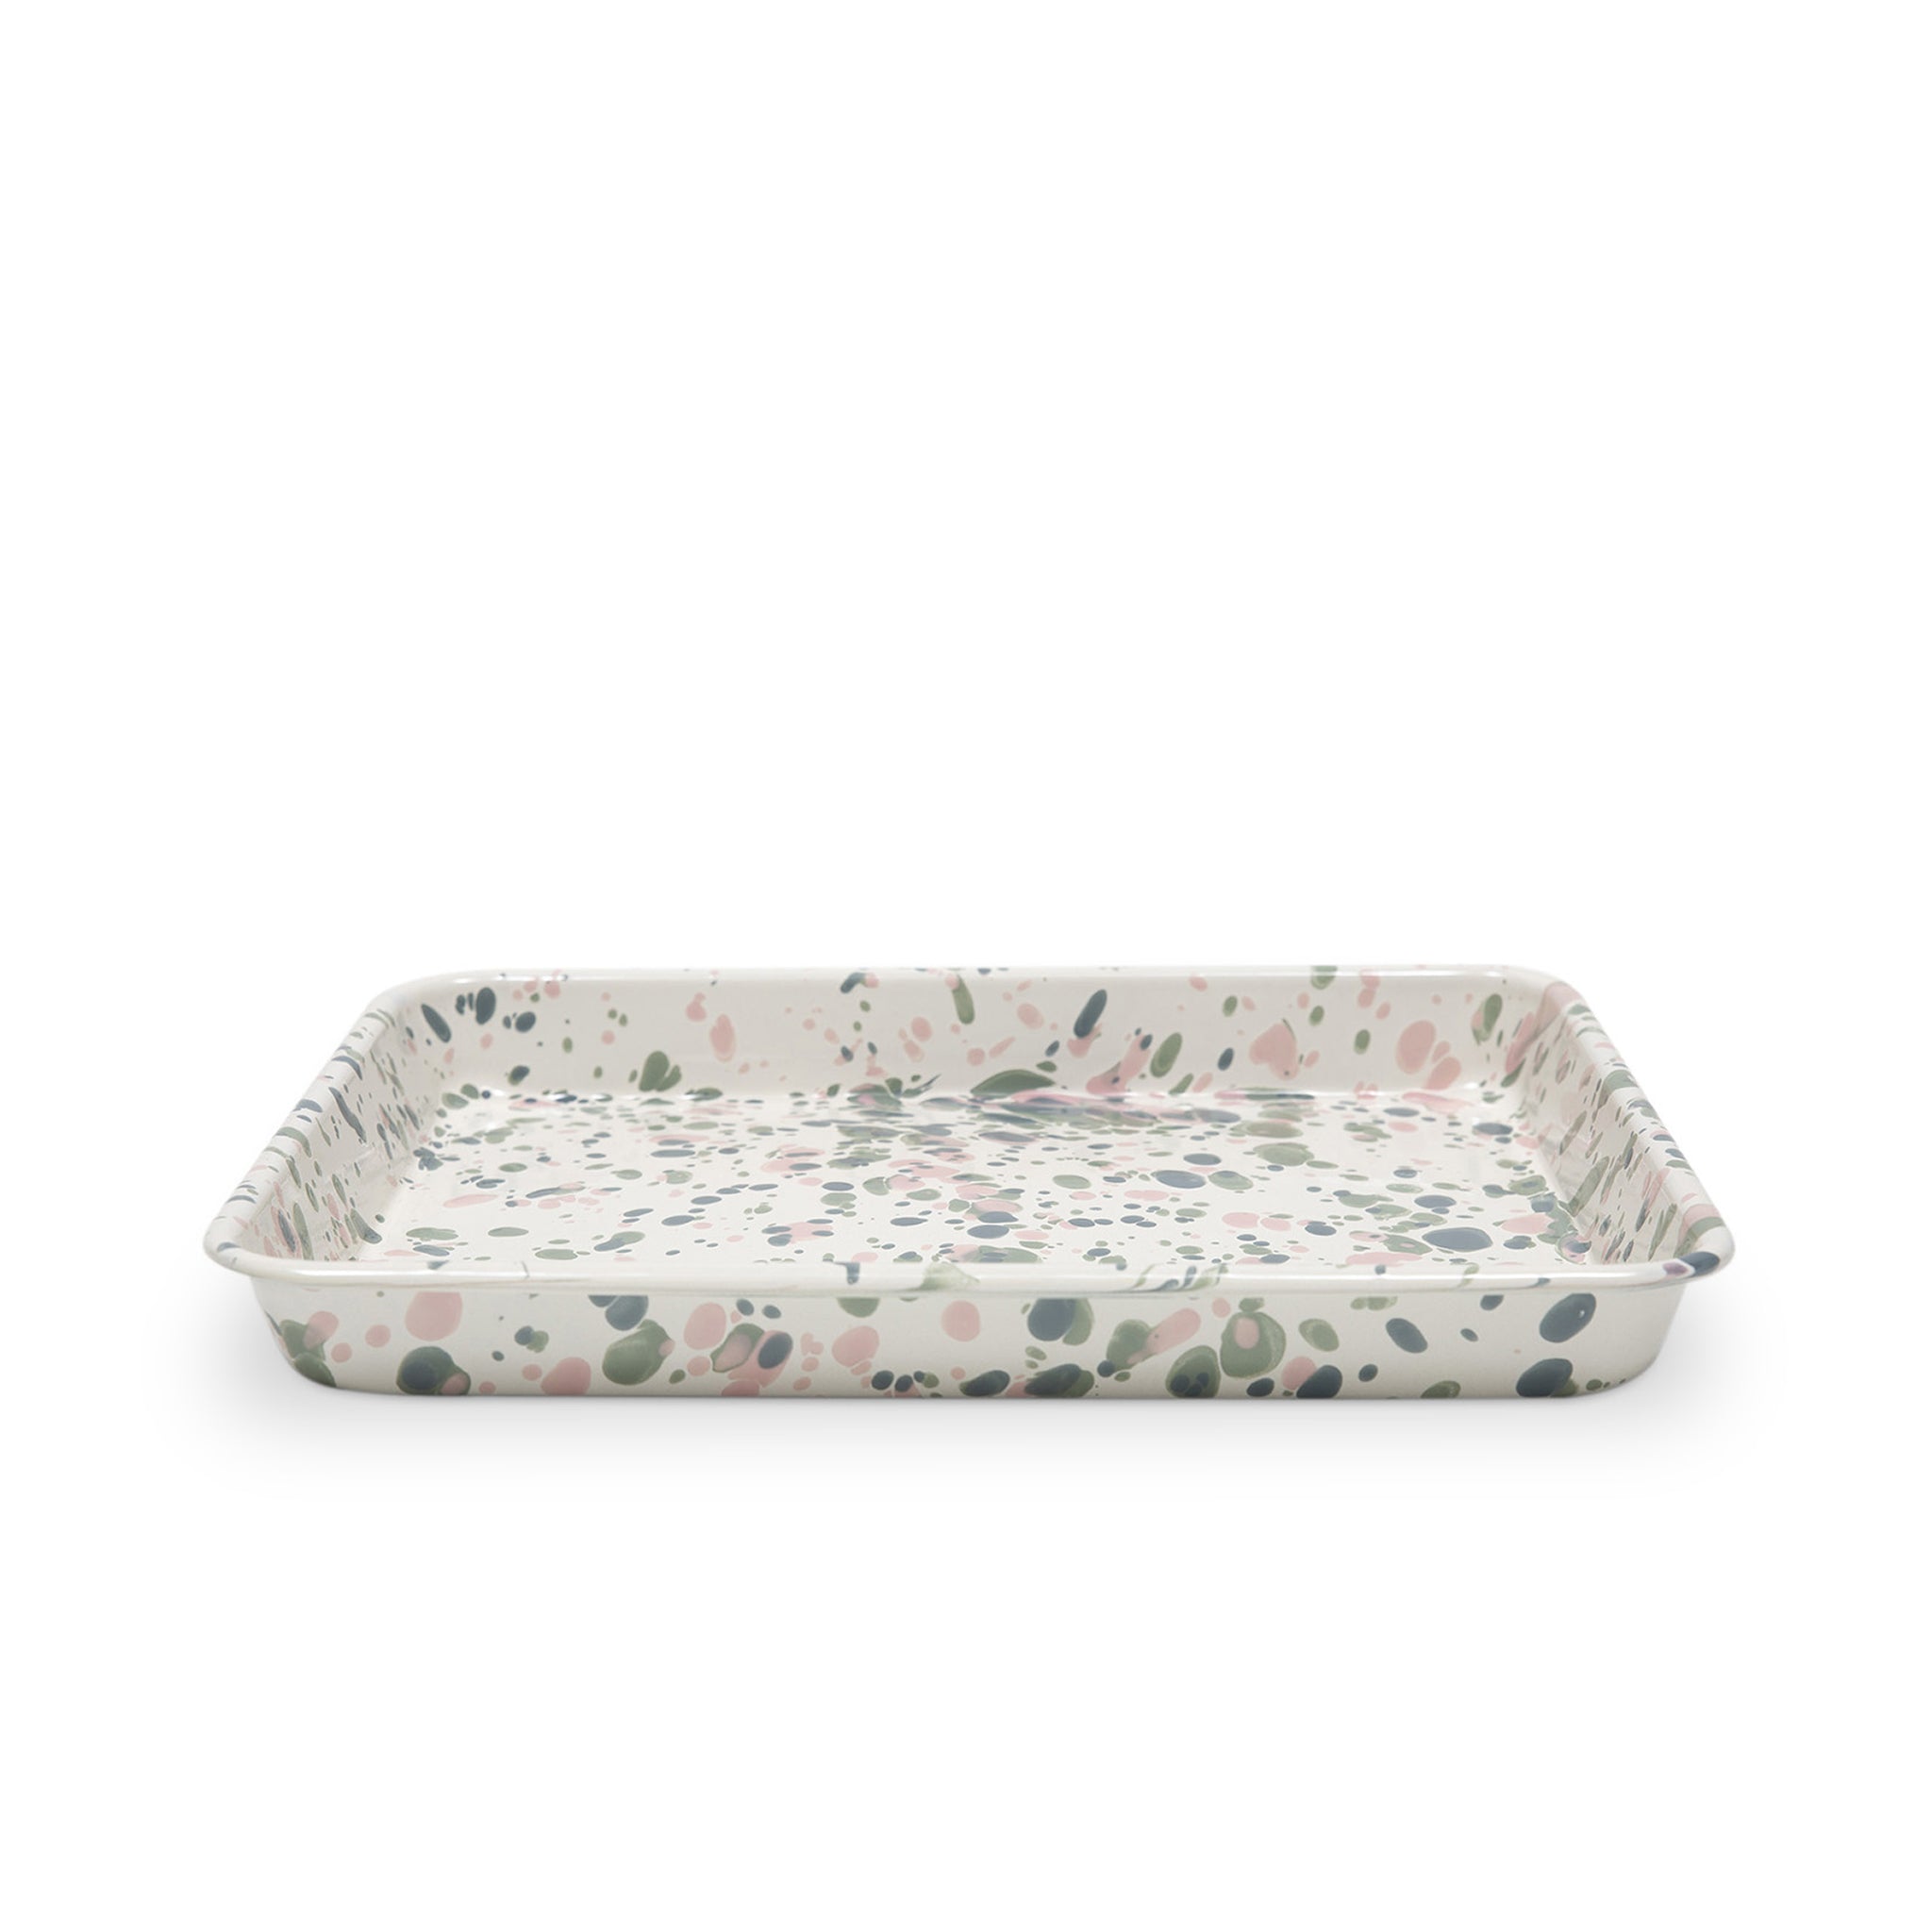  Catalina Enamel Rectangle Tray in Mint Hibiscus by Crow Canyon Home.